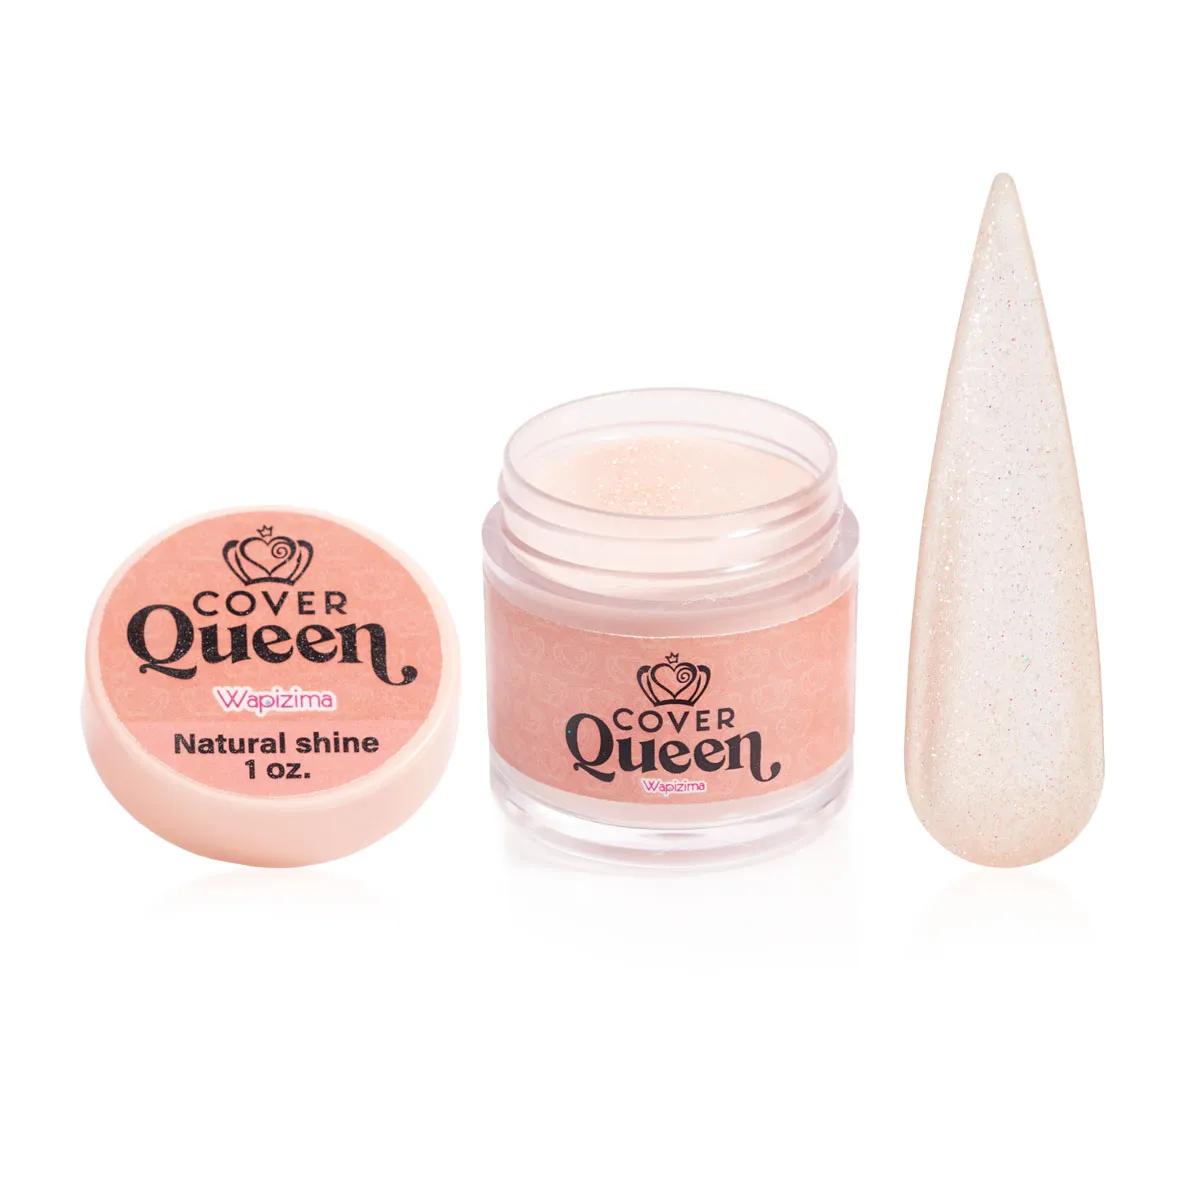 W.Cover Queen Natural Shine 1 oz